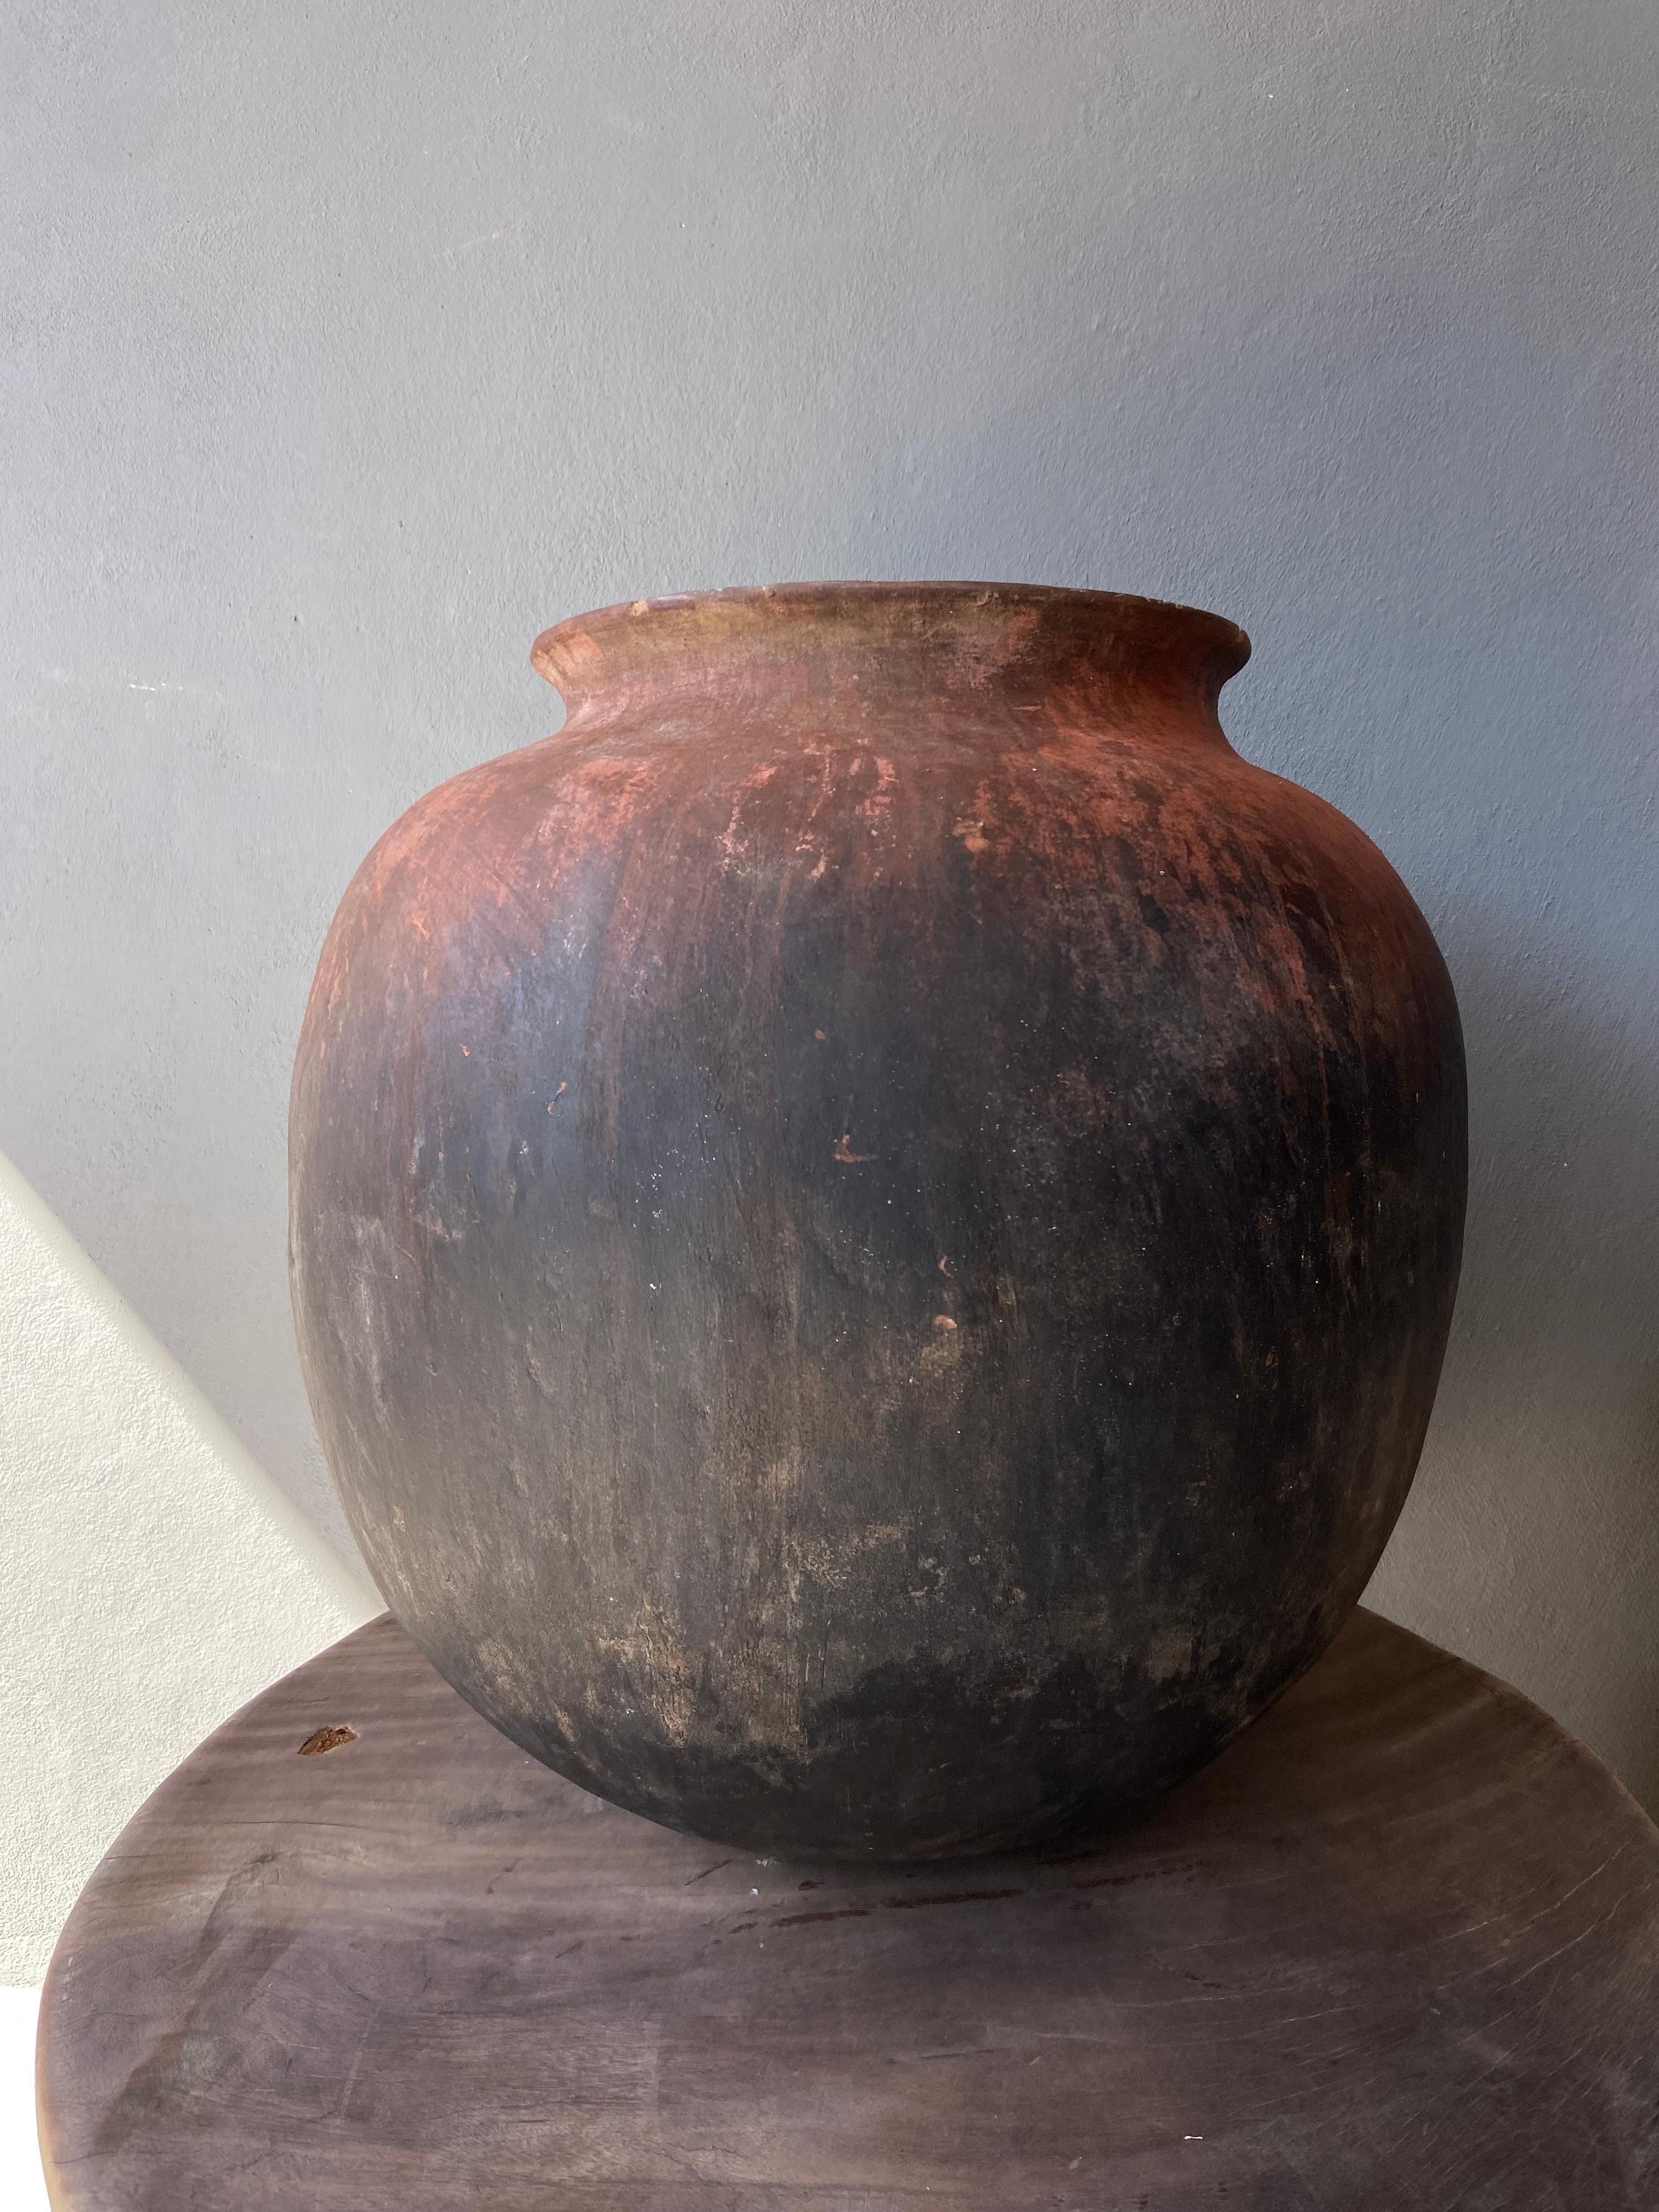 Mid 20th century terracotta water pot from the high sierras of Michoacan, Mexico.  Nicely formed consistent shape throughout. Hand coiled pottery.